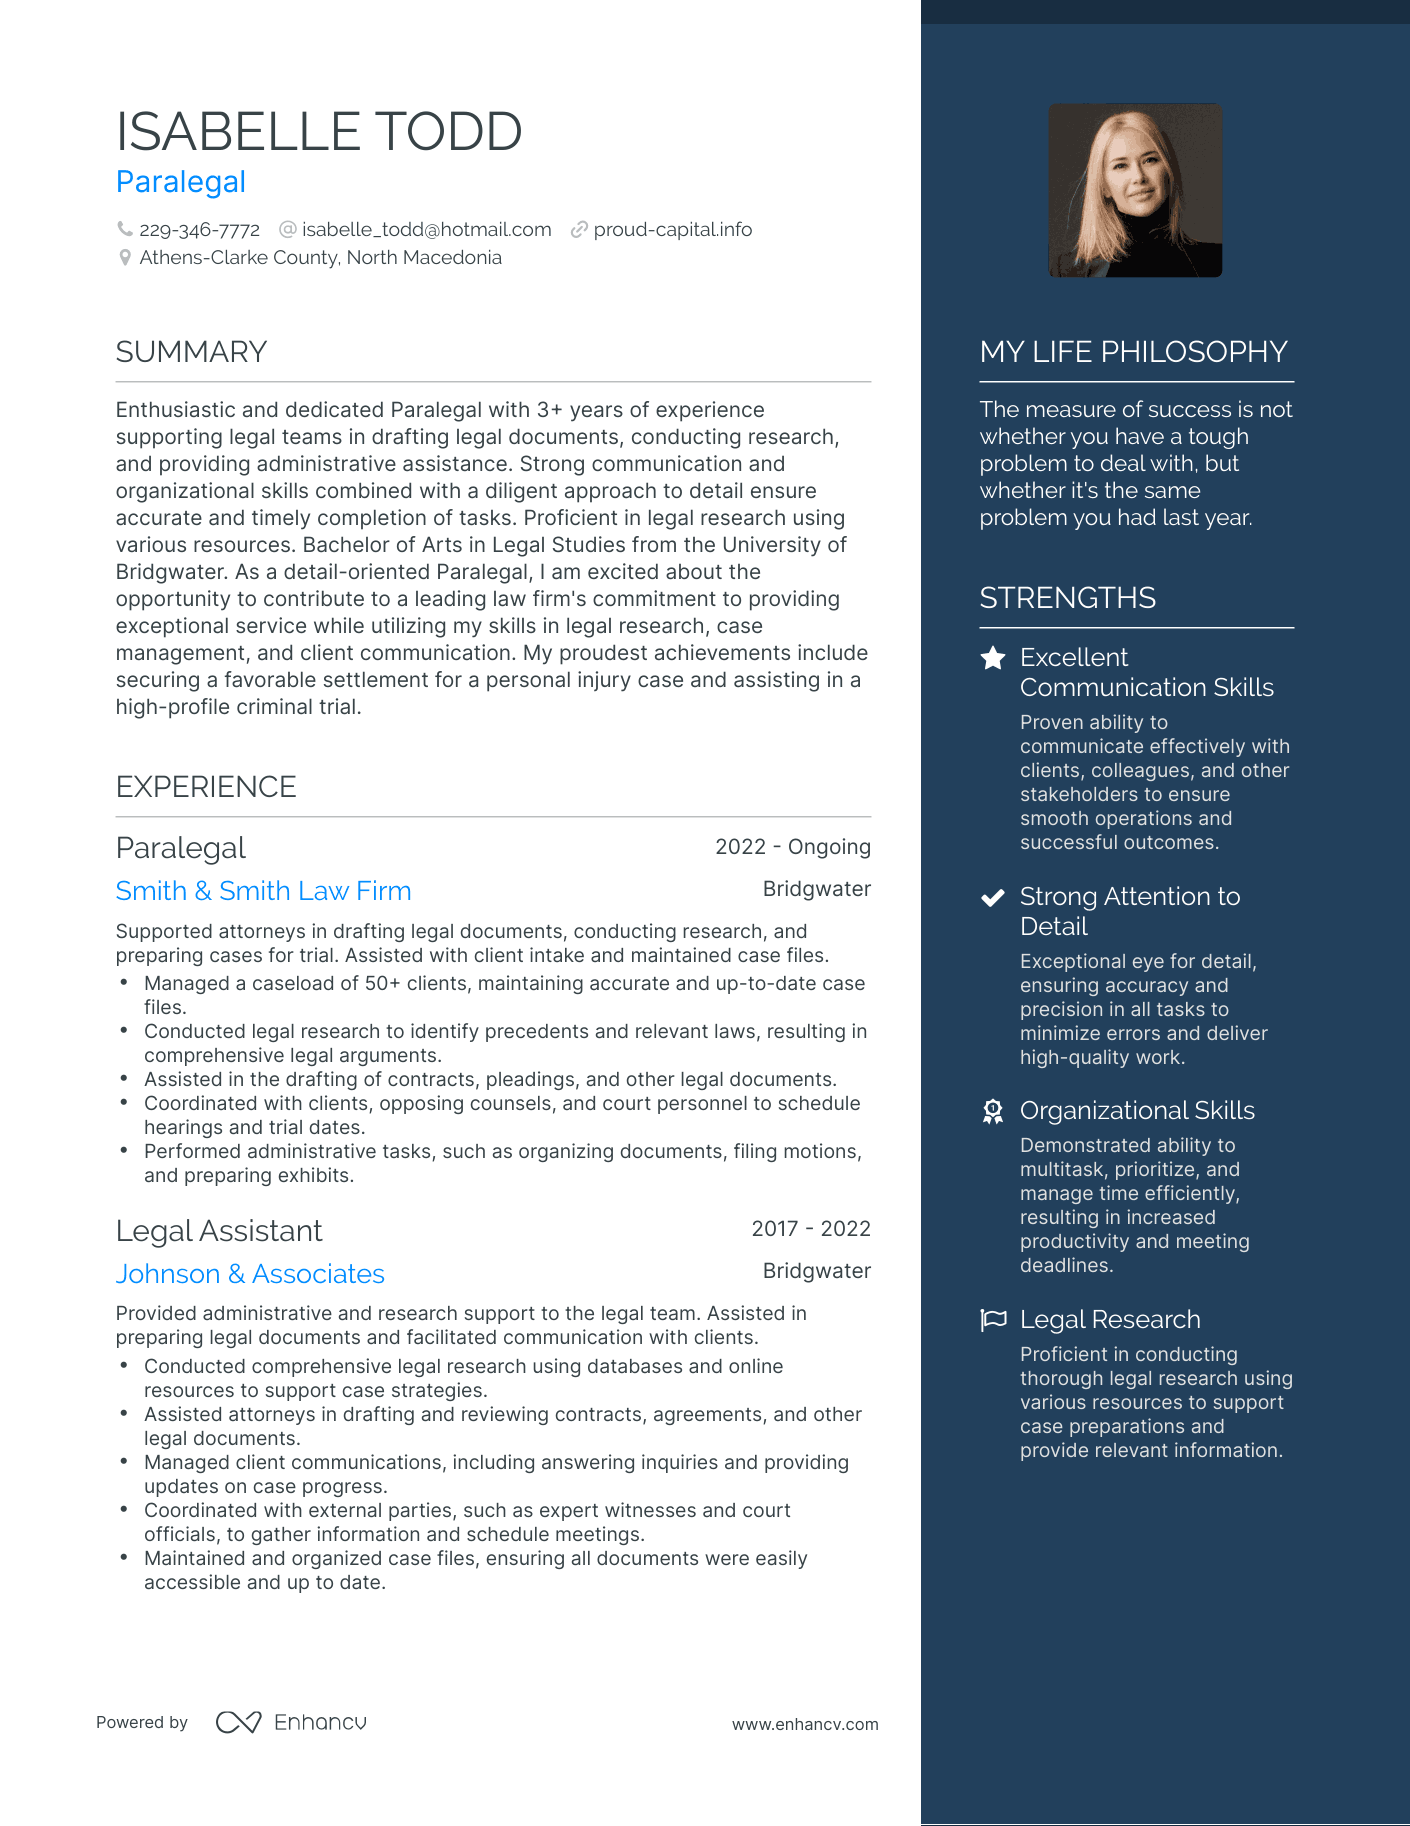 Paralegal resume example